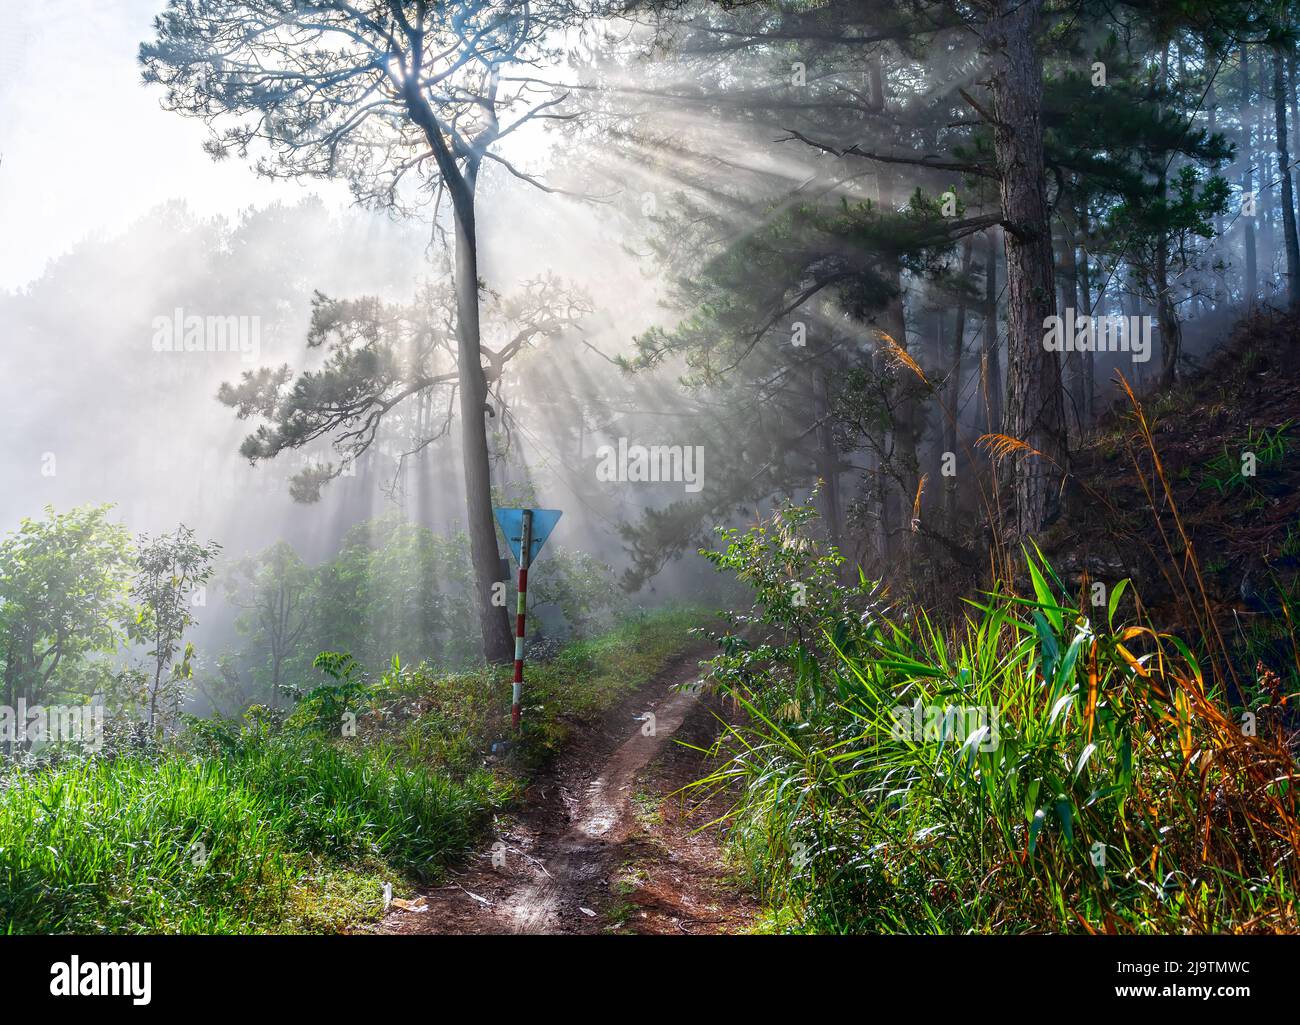 The Morning Pine Forest With Sunlight Breaking Through The Mists Is So